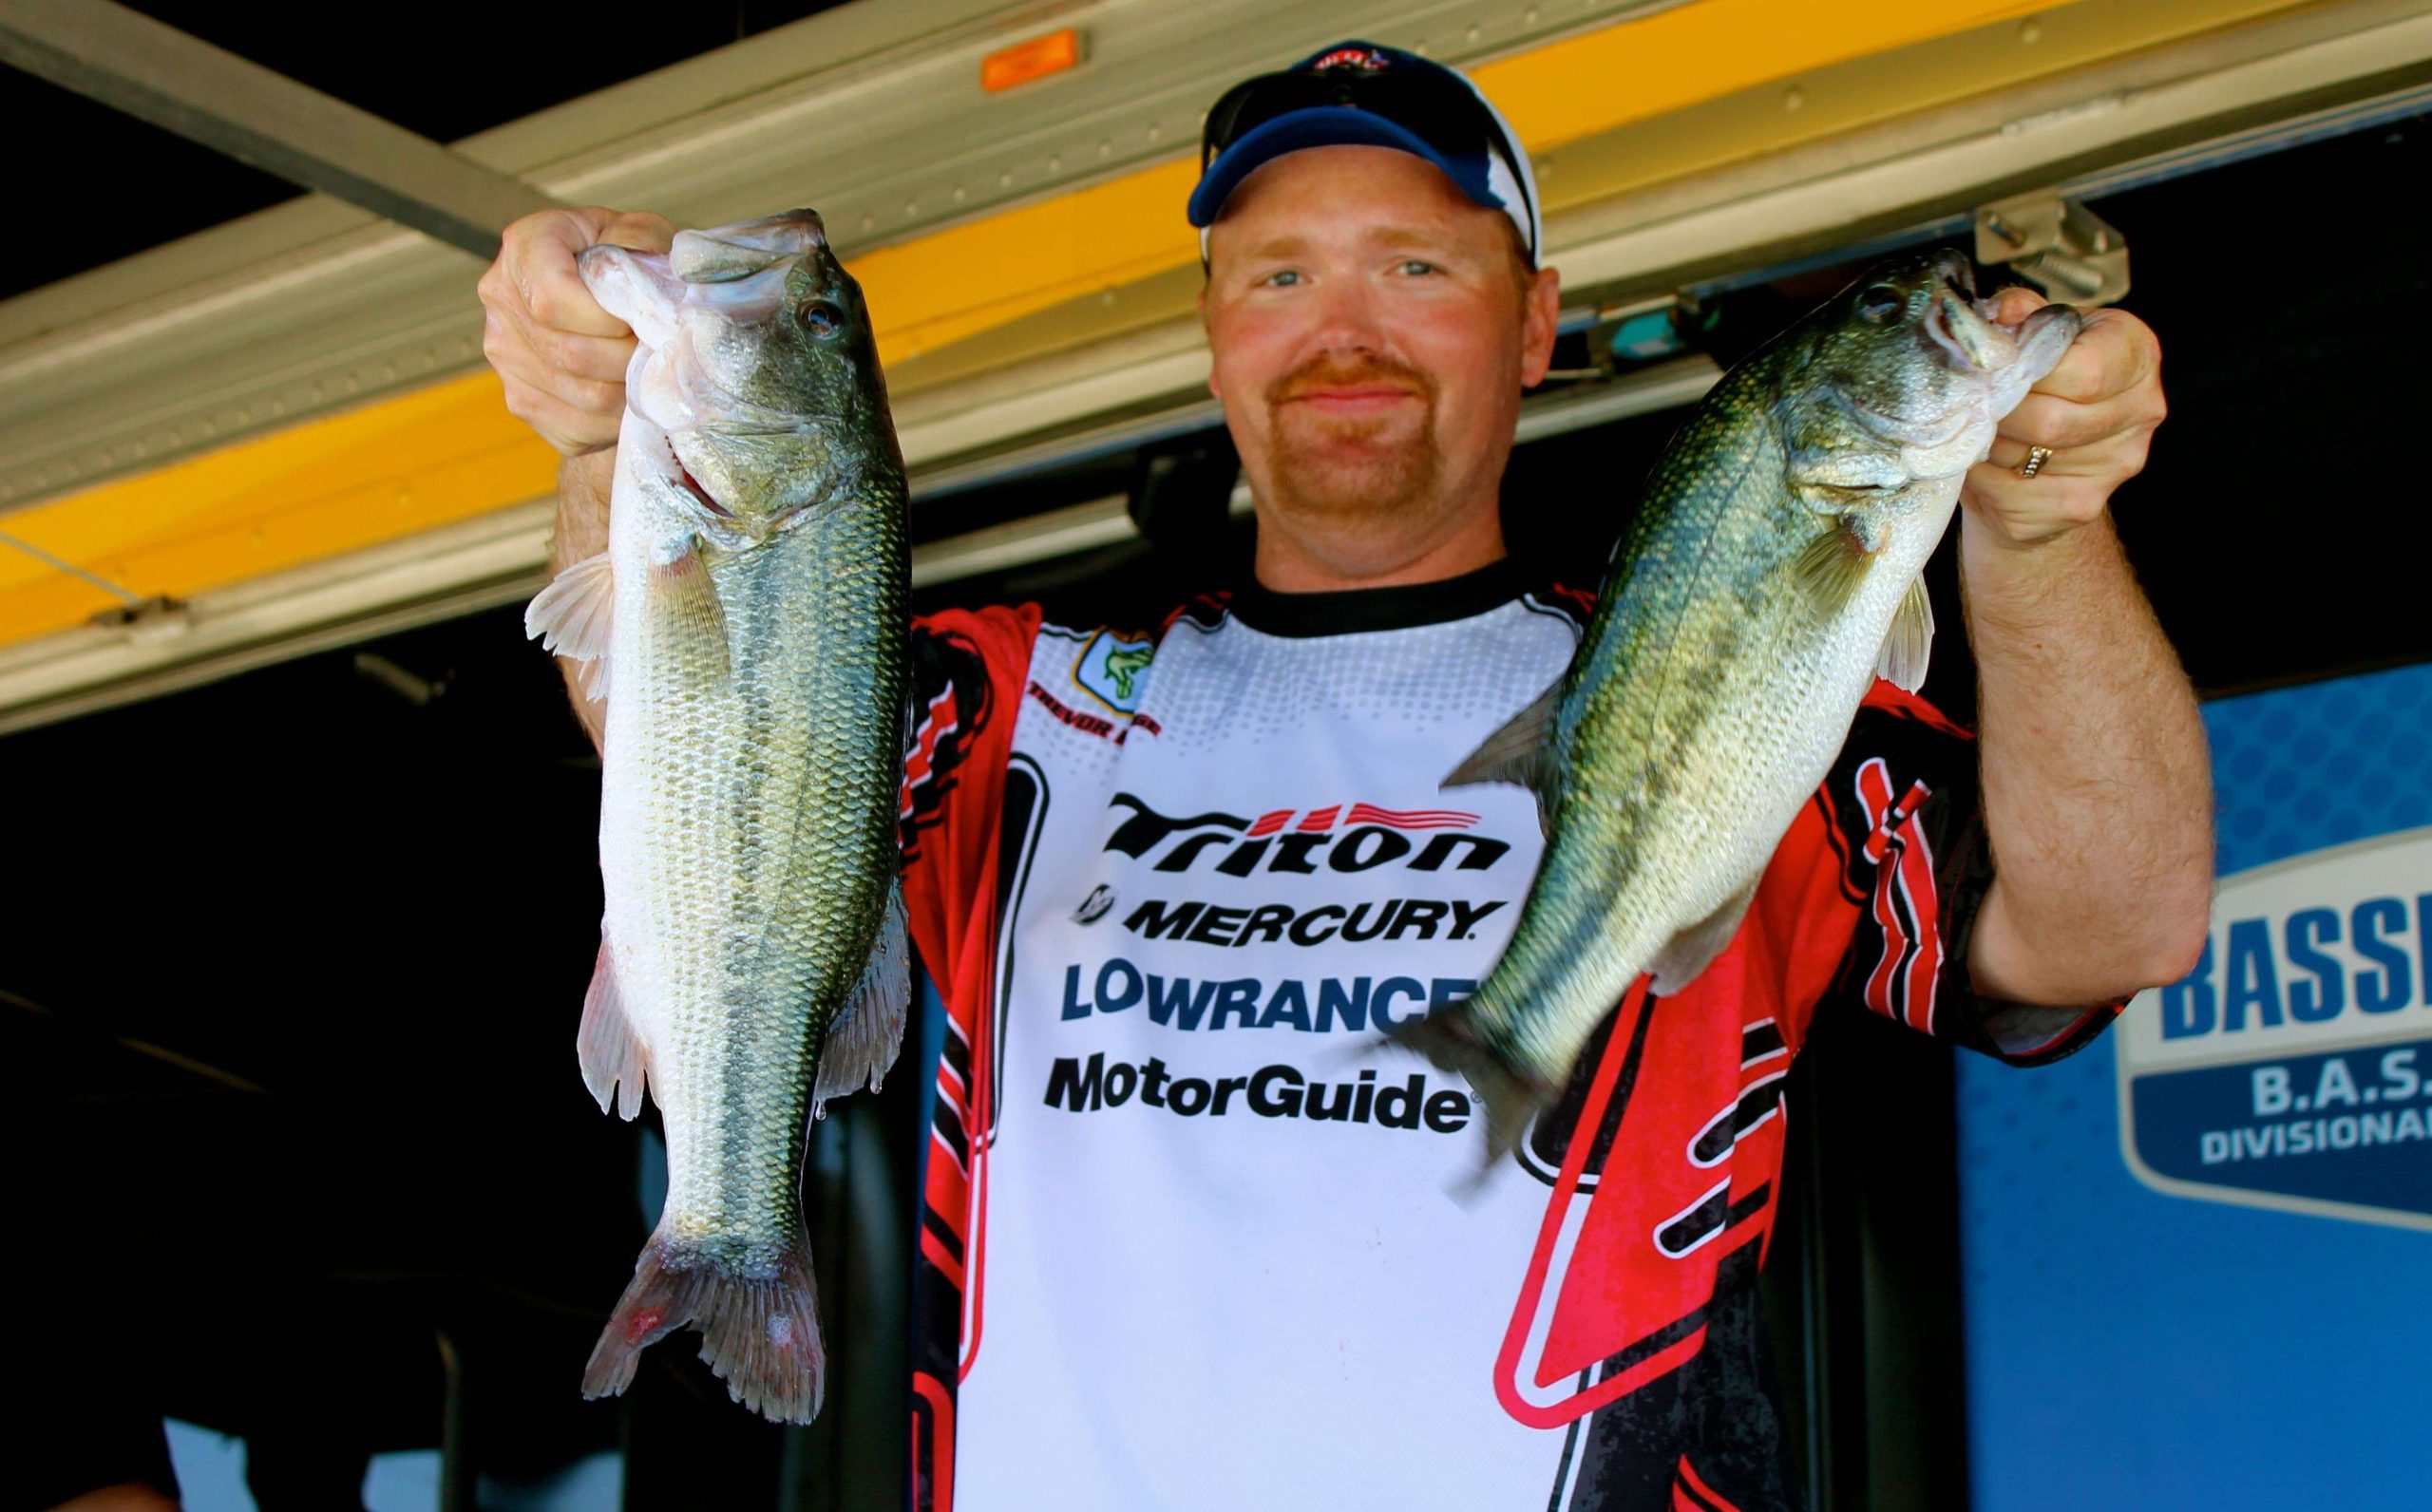 In second place after Day 1 on Eufaula is Texas B.A.S.S. Nation angler Trevor Rogge, with 13-14. Back home in San Antonio, Texas, he works as a sales manager.